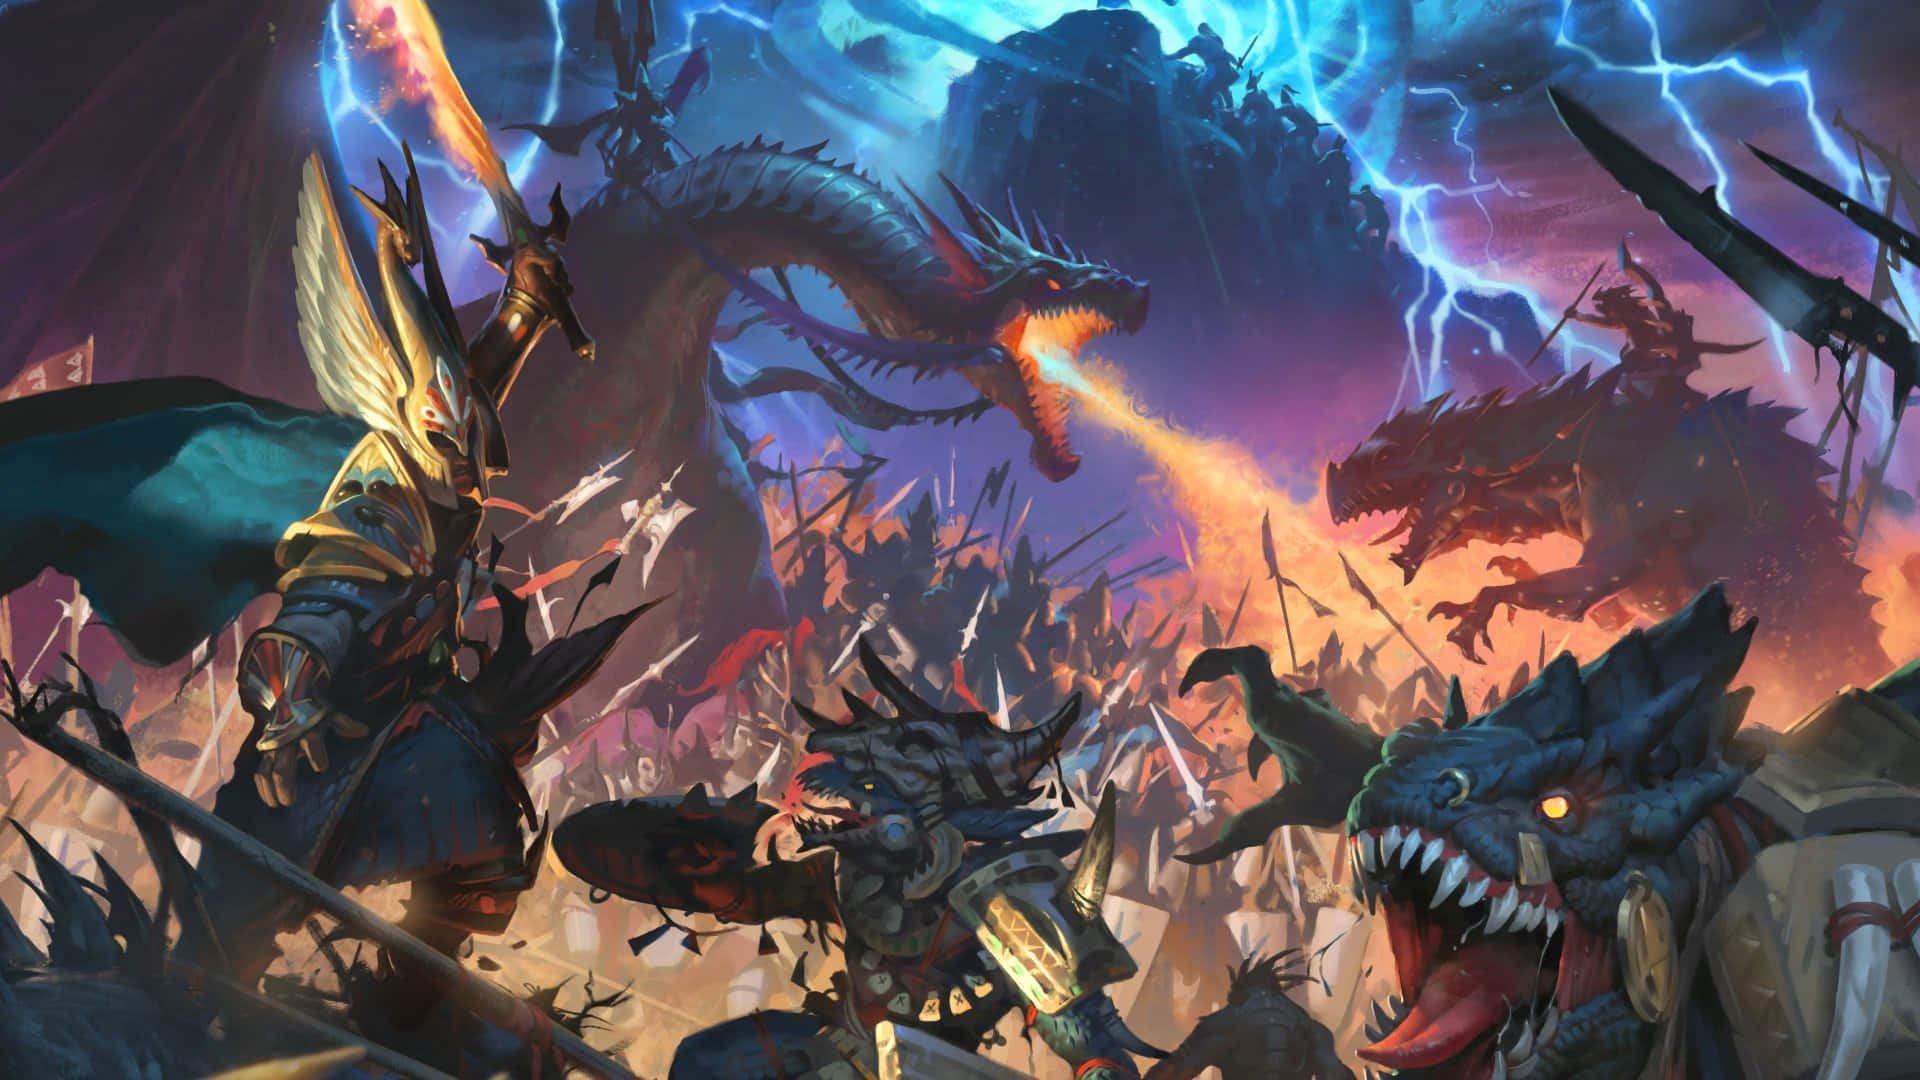 Total War: Warhammer II unleashes its might on the gaming world